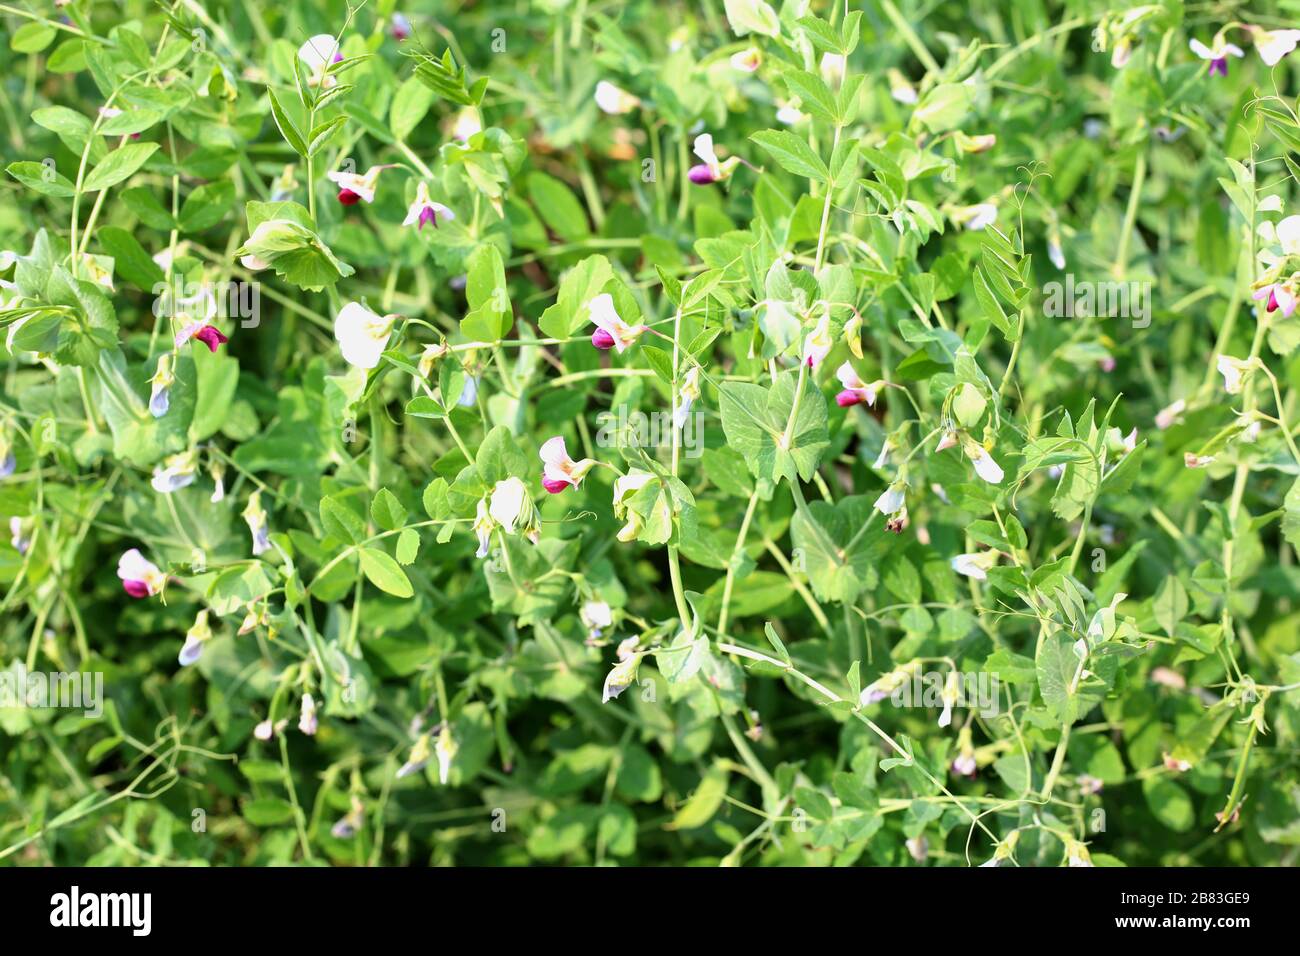 Growing peas outdoors and blurred background Stock Photo